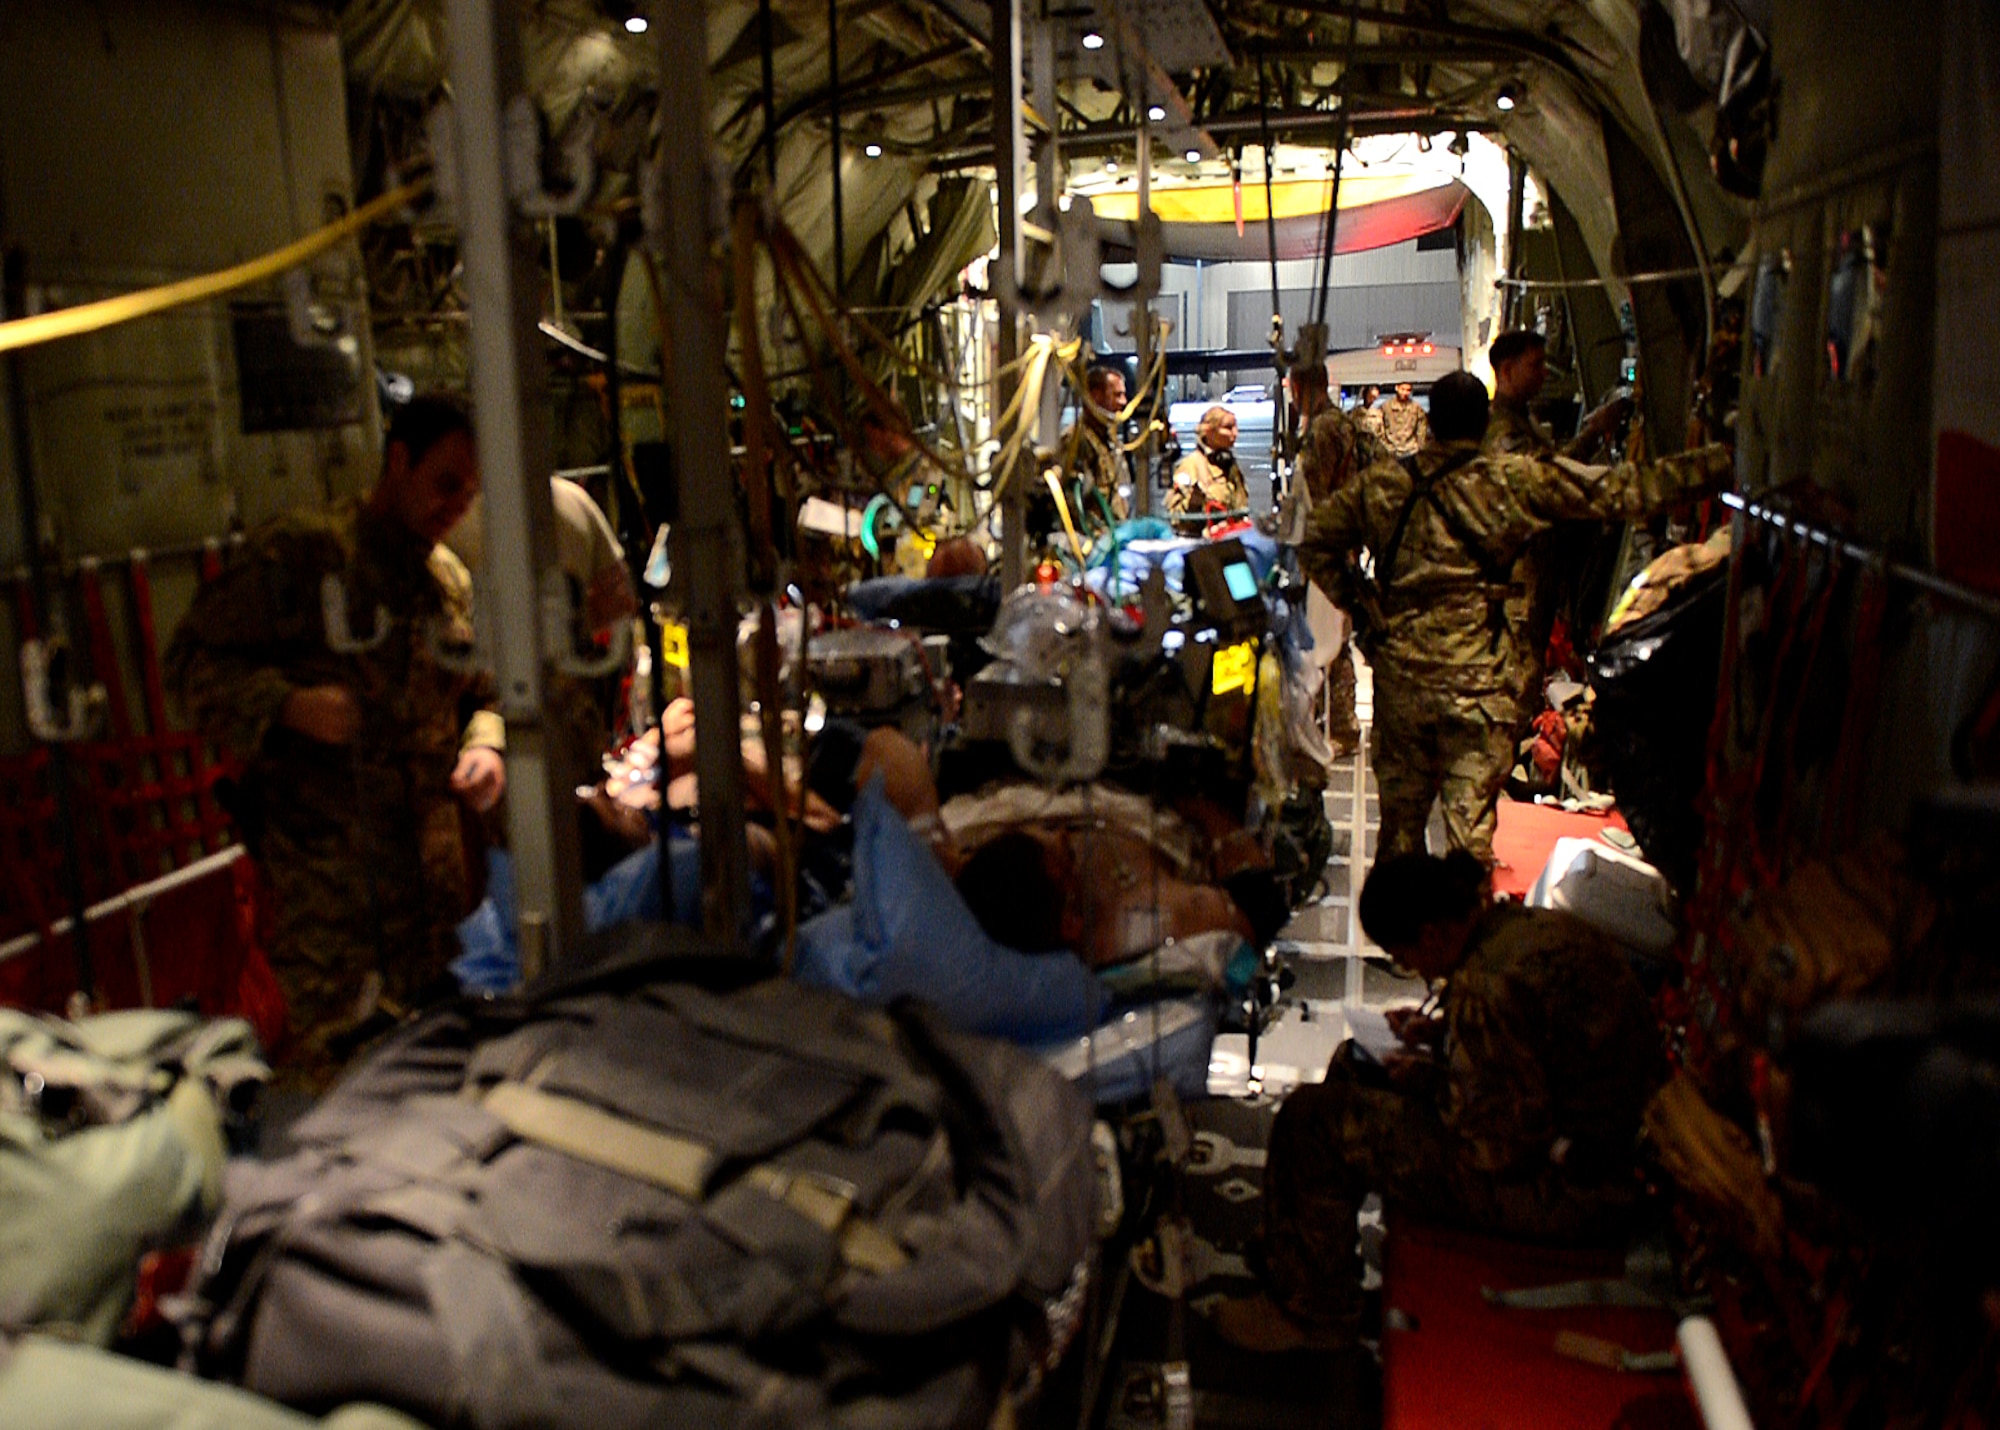 U.S. Air Force Airmen from the 455th Expeditionary Aeromedical Evacuation Squadron prepare to unload patients at Bagram Airfield, Afghanistan, May 29, 2014. (U.S. Air Force photo by Staff Sgt. Evelyn Chavez)